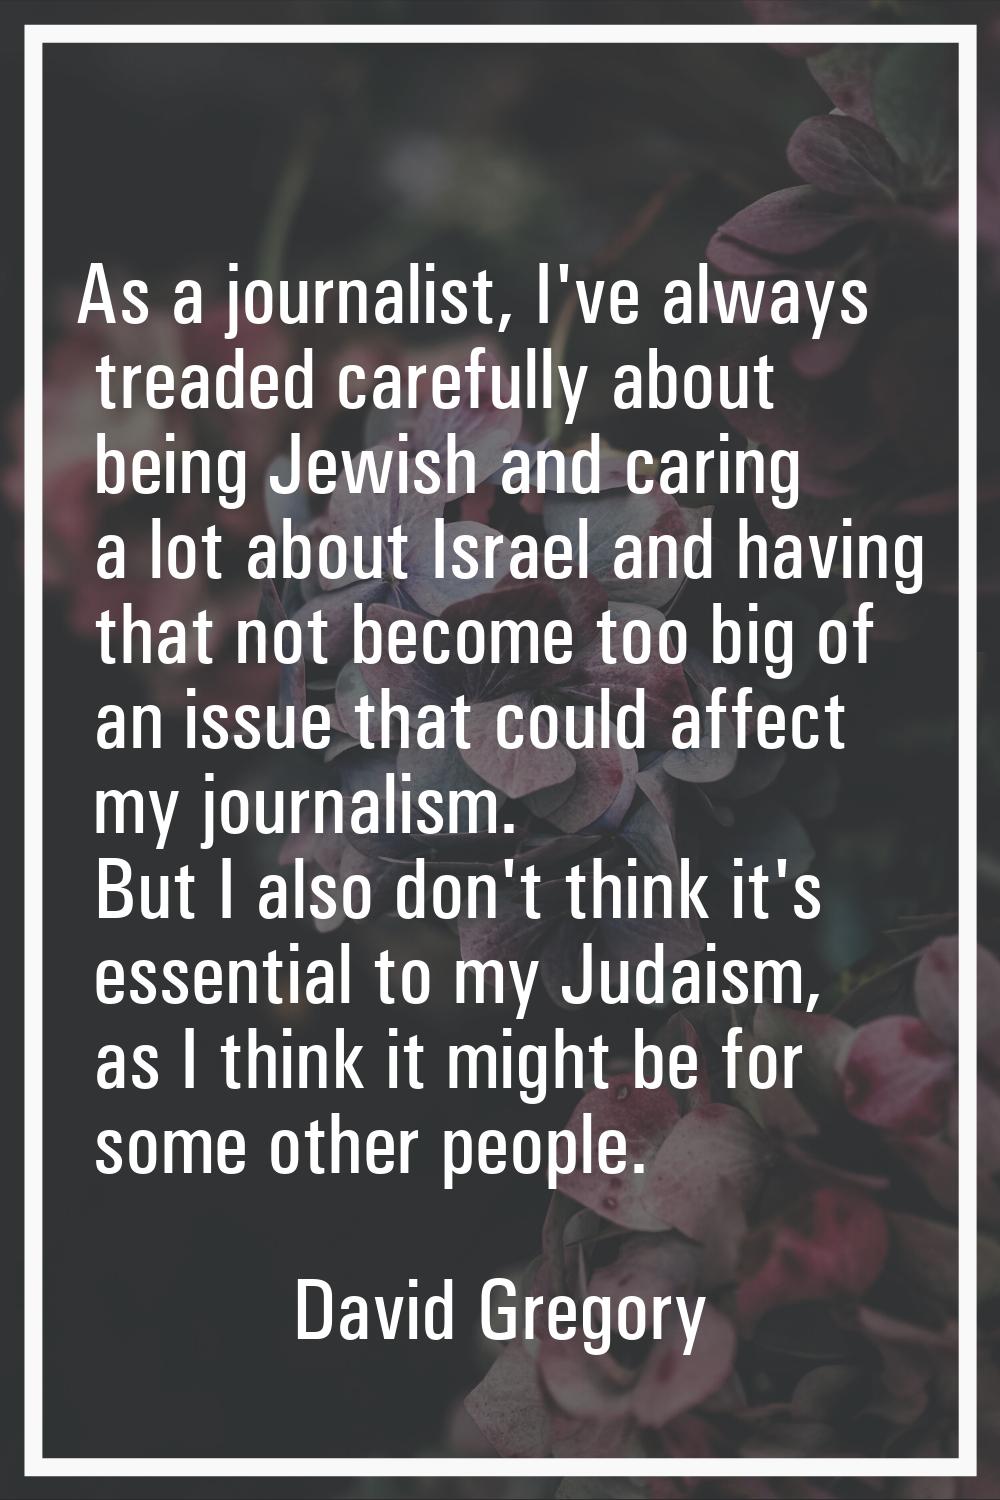 As a journalist, I've always treaded carefully about being Jewish and caring a lot about Israel and